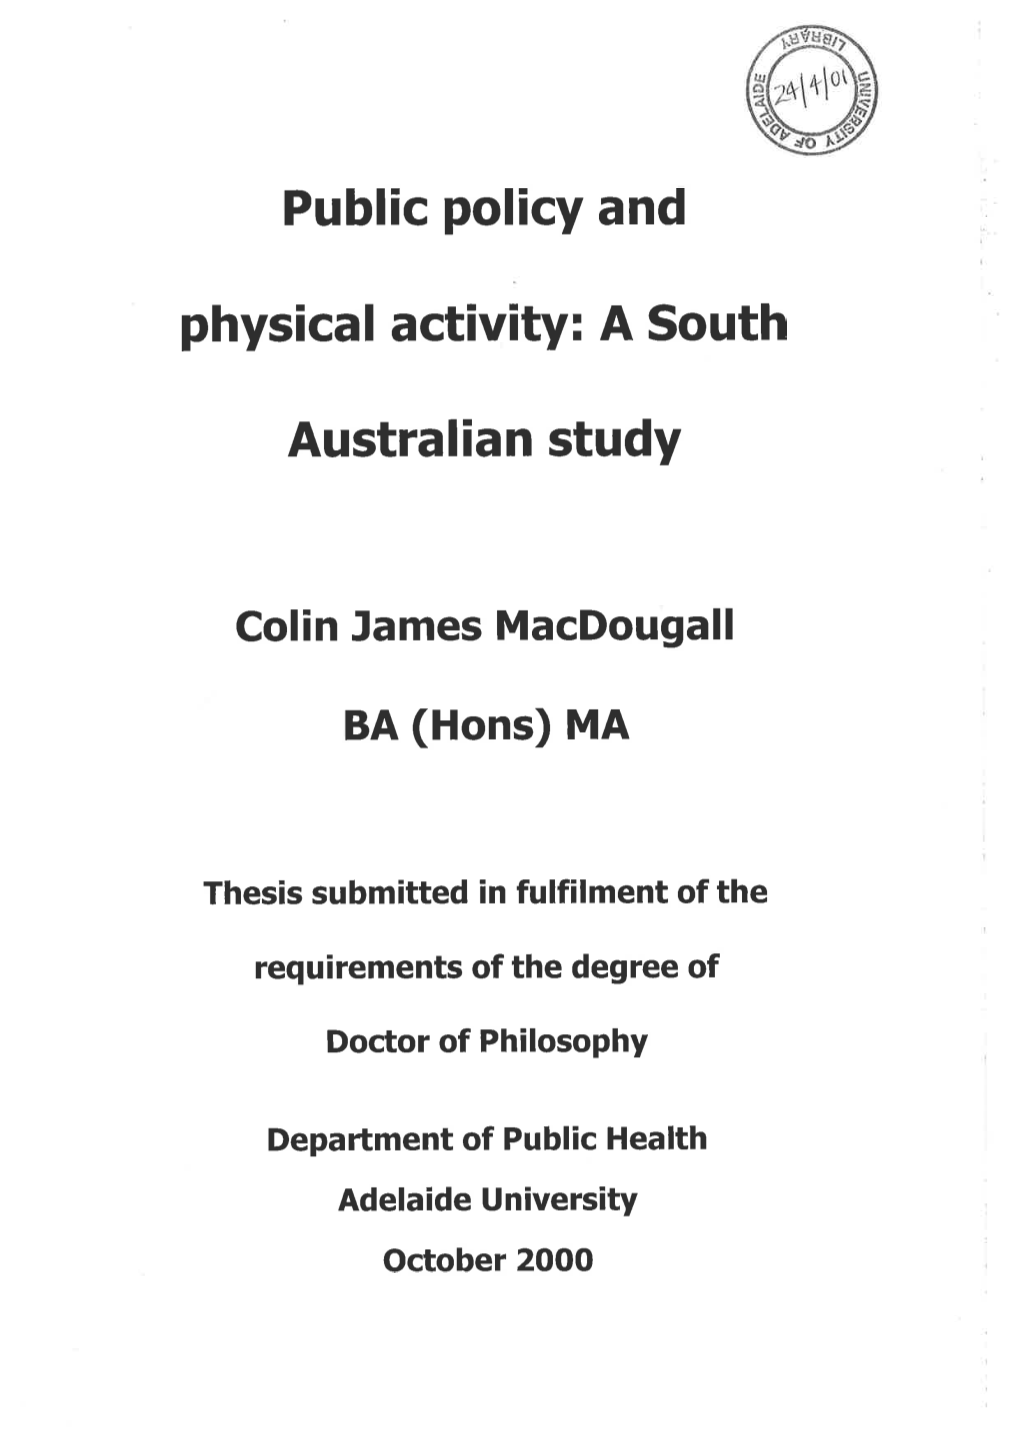 Public Policy and Physical Activity : A